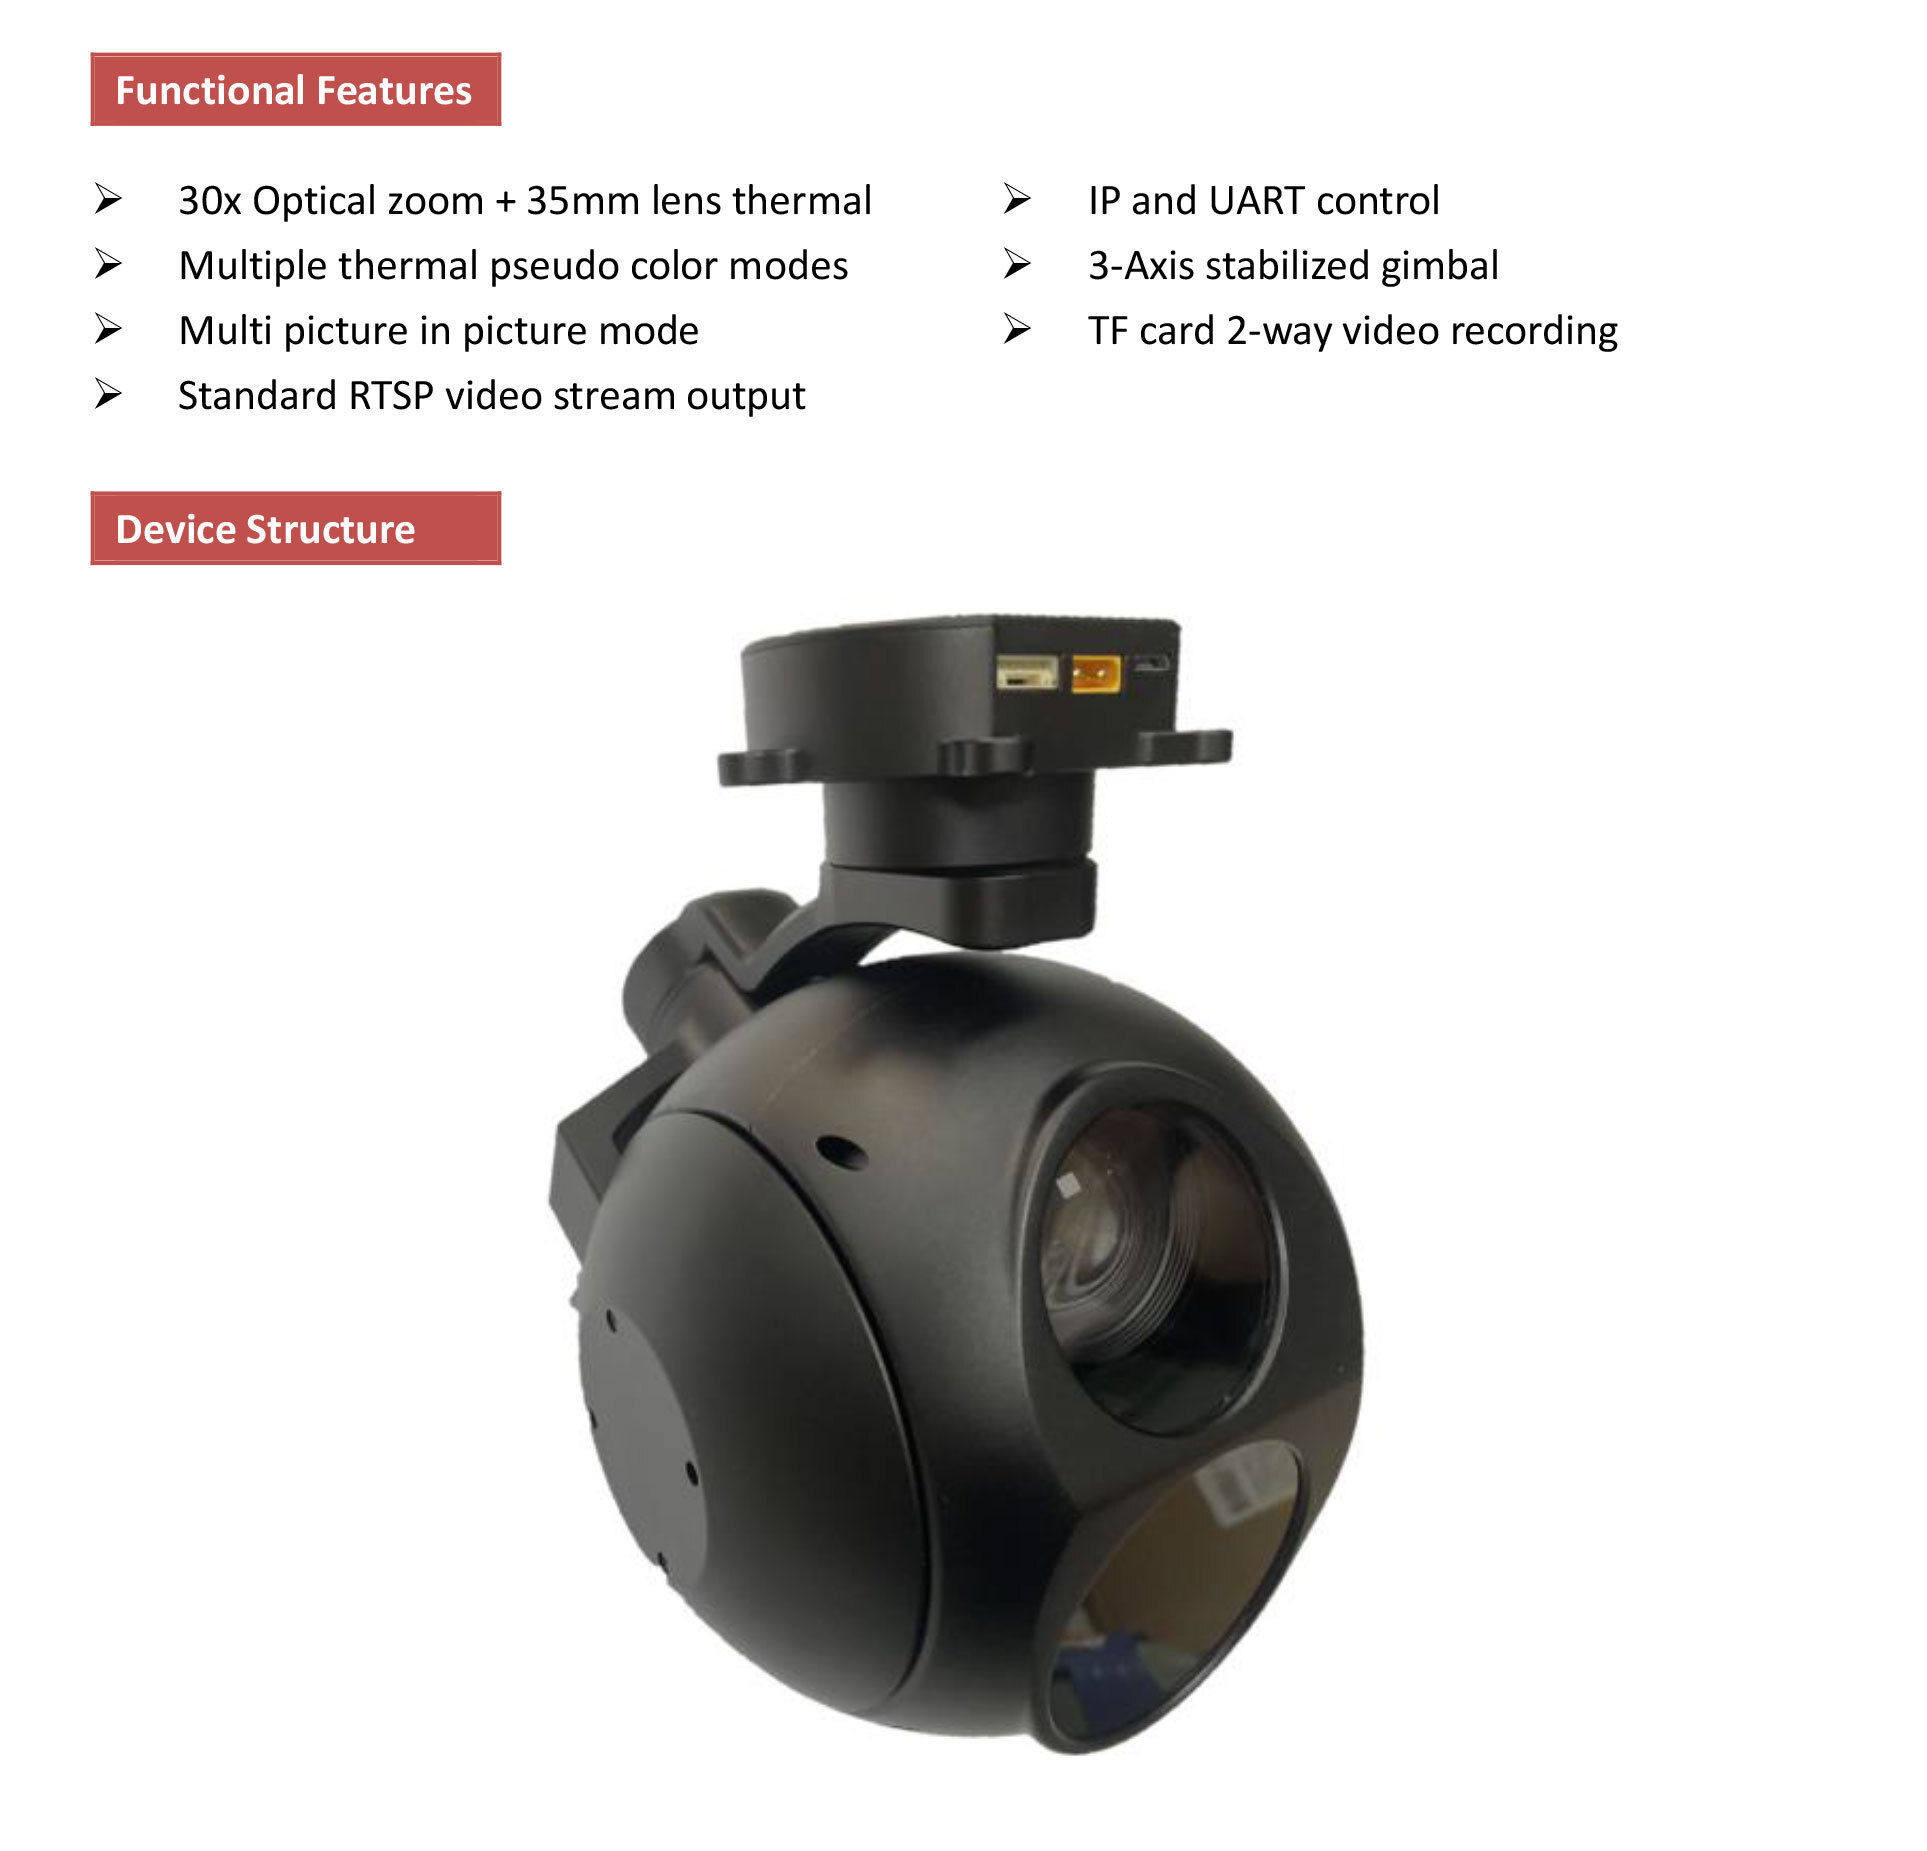 KIP30G635 30x optical zoom + 35mm lens 640*512 thermal imaging camera with 3-axis gimbal, Ethernet/IP output